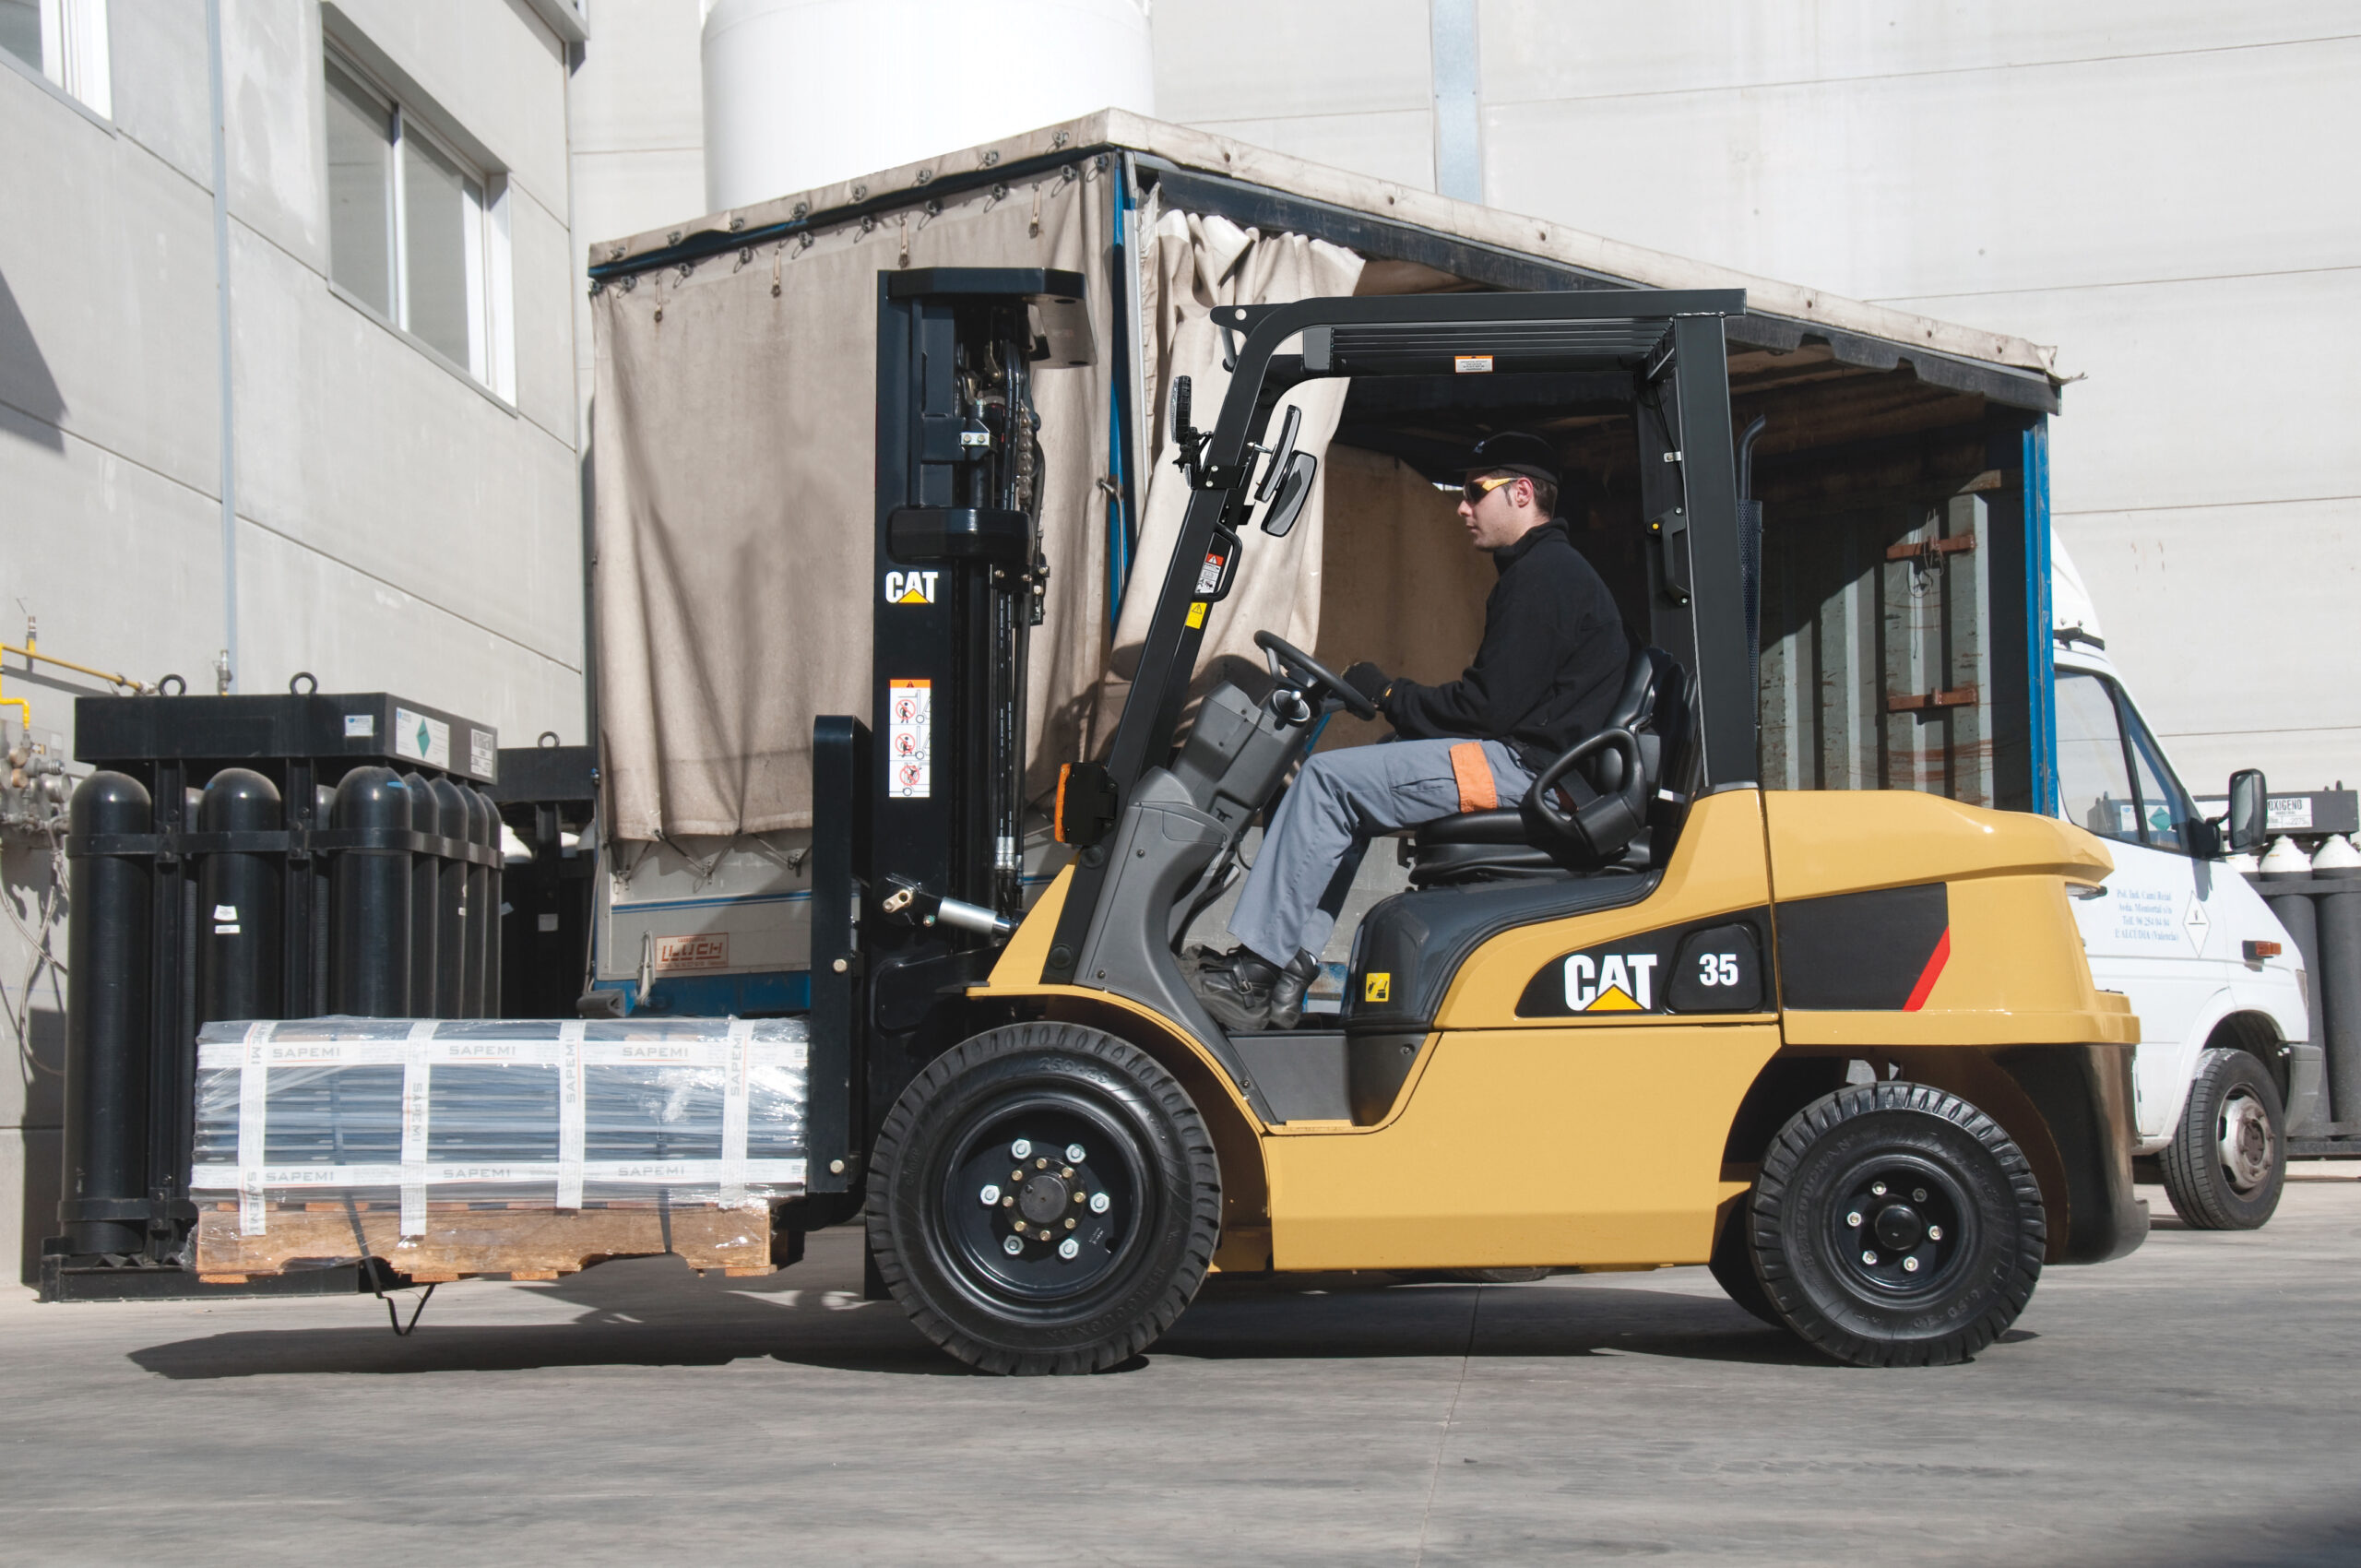 DOES YOUR BUSINESS NEED A NEW FORKLIFT?